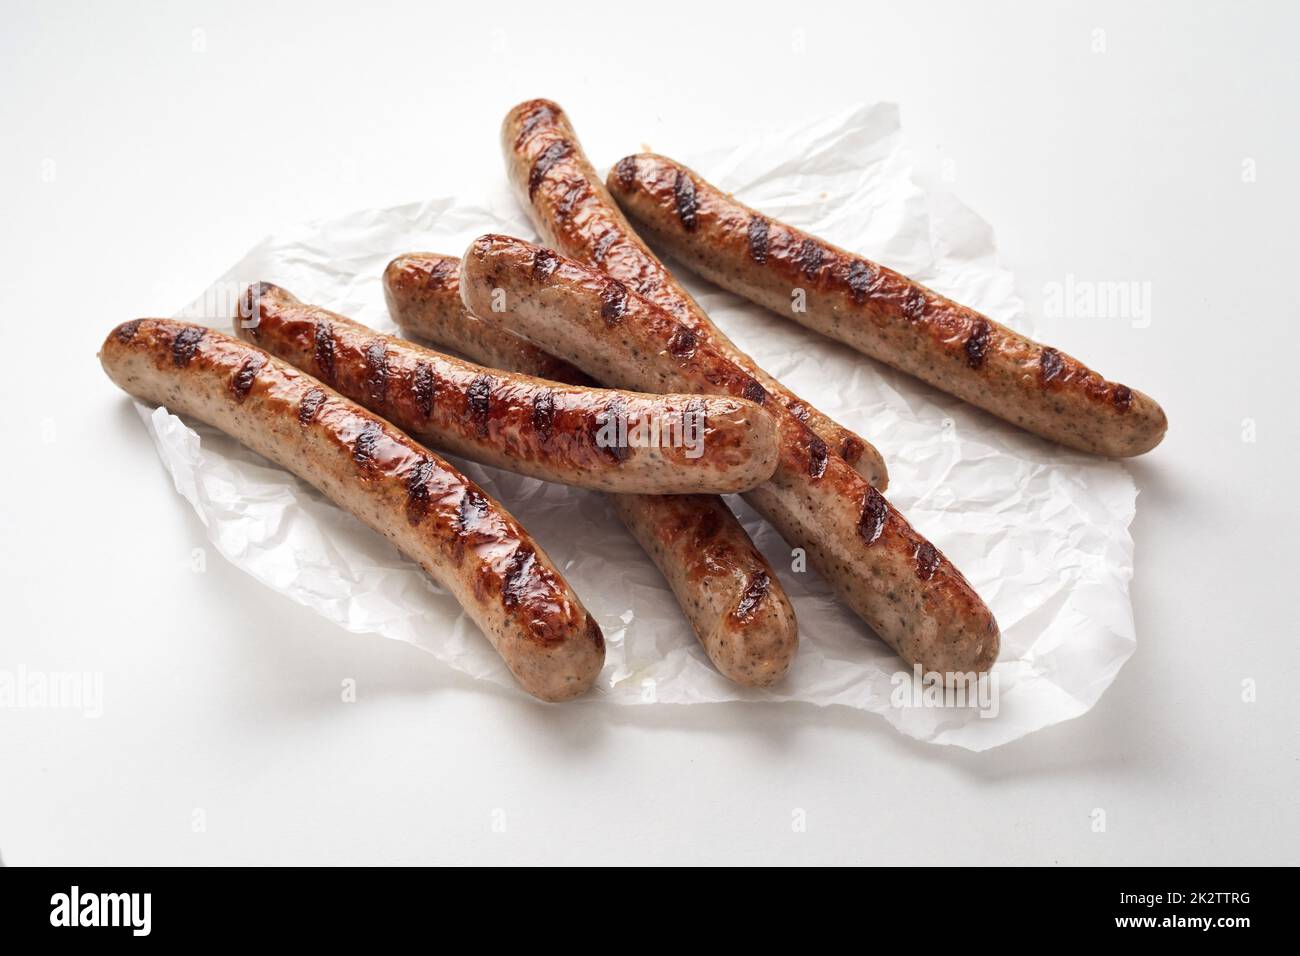 Tasty roasted sausages against white background Stock Photo